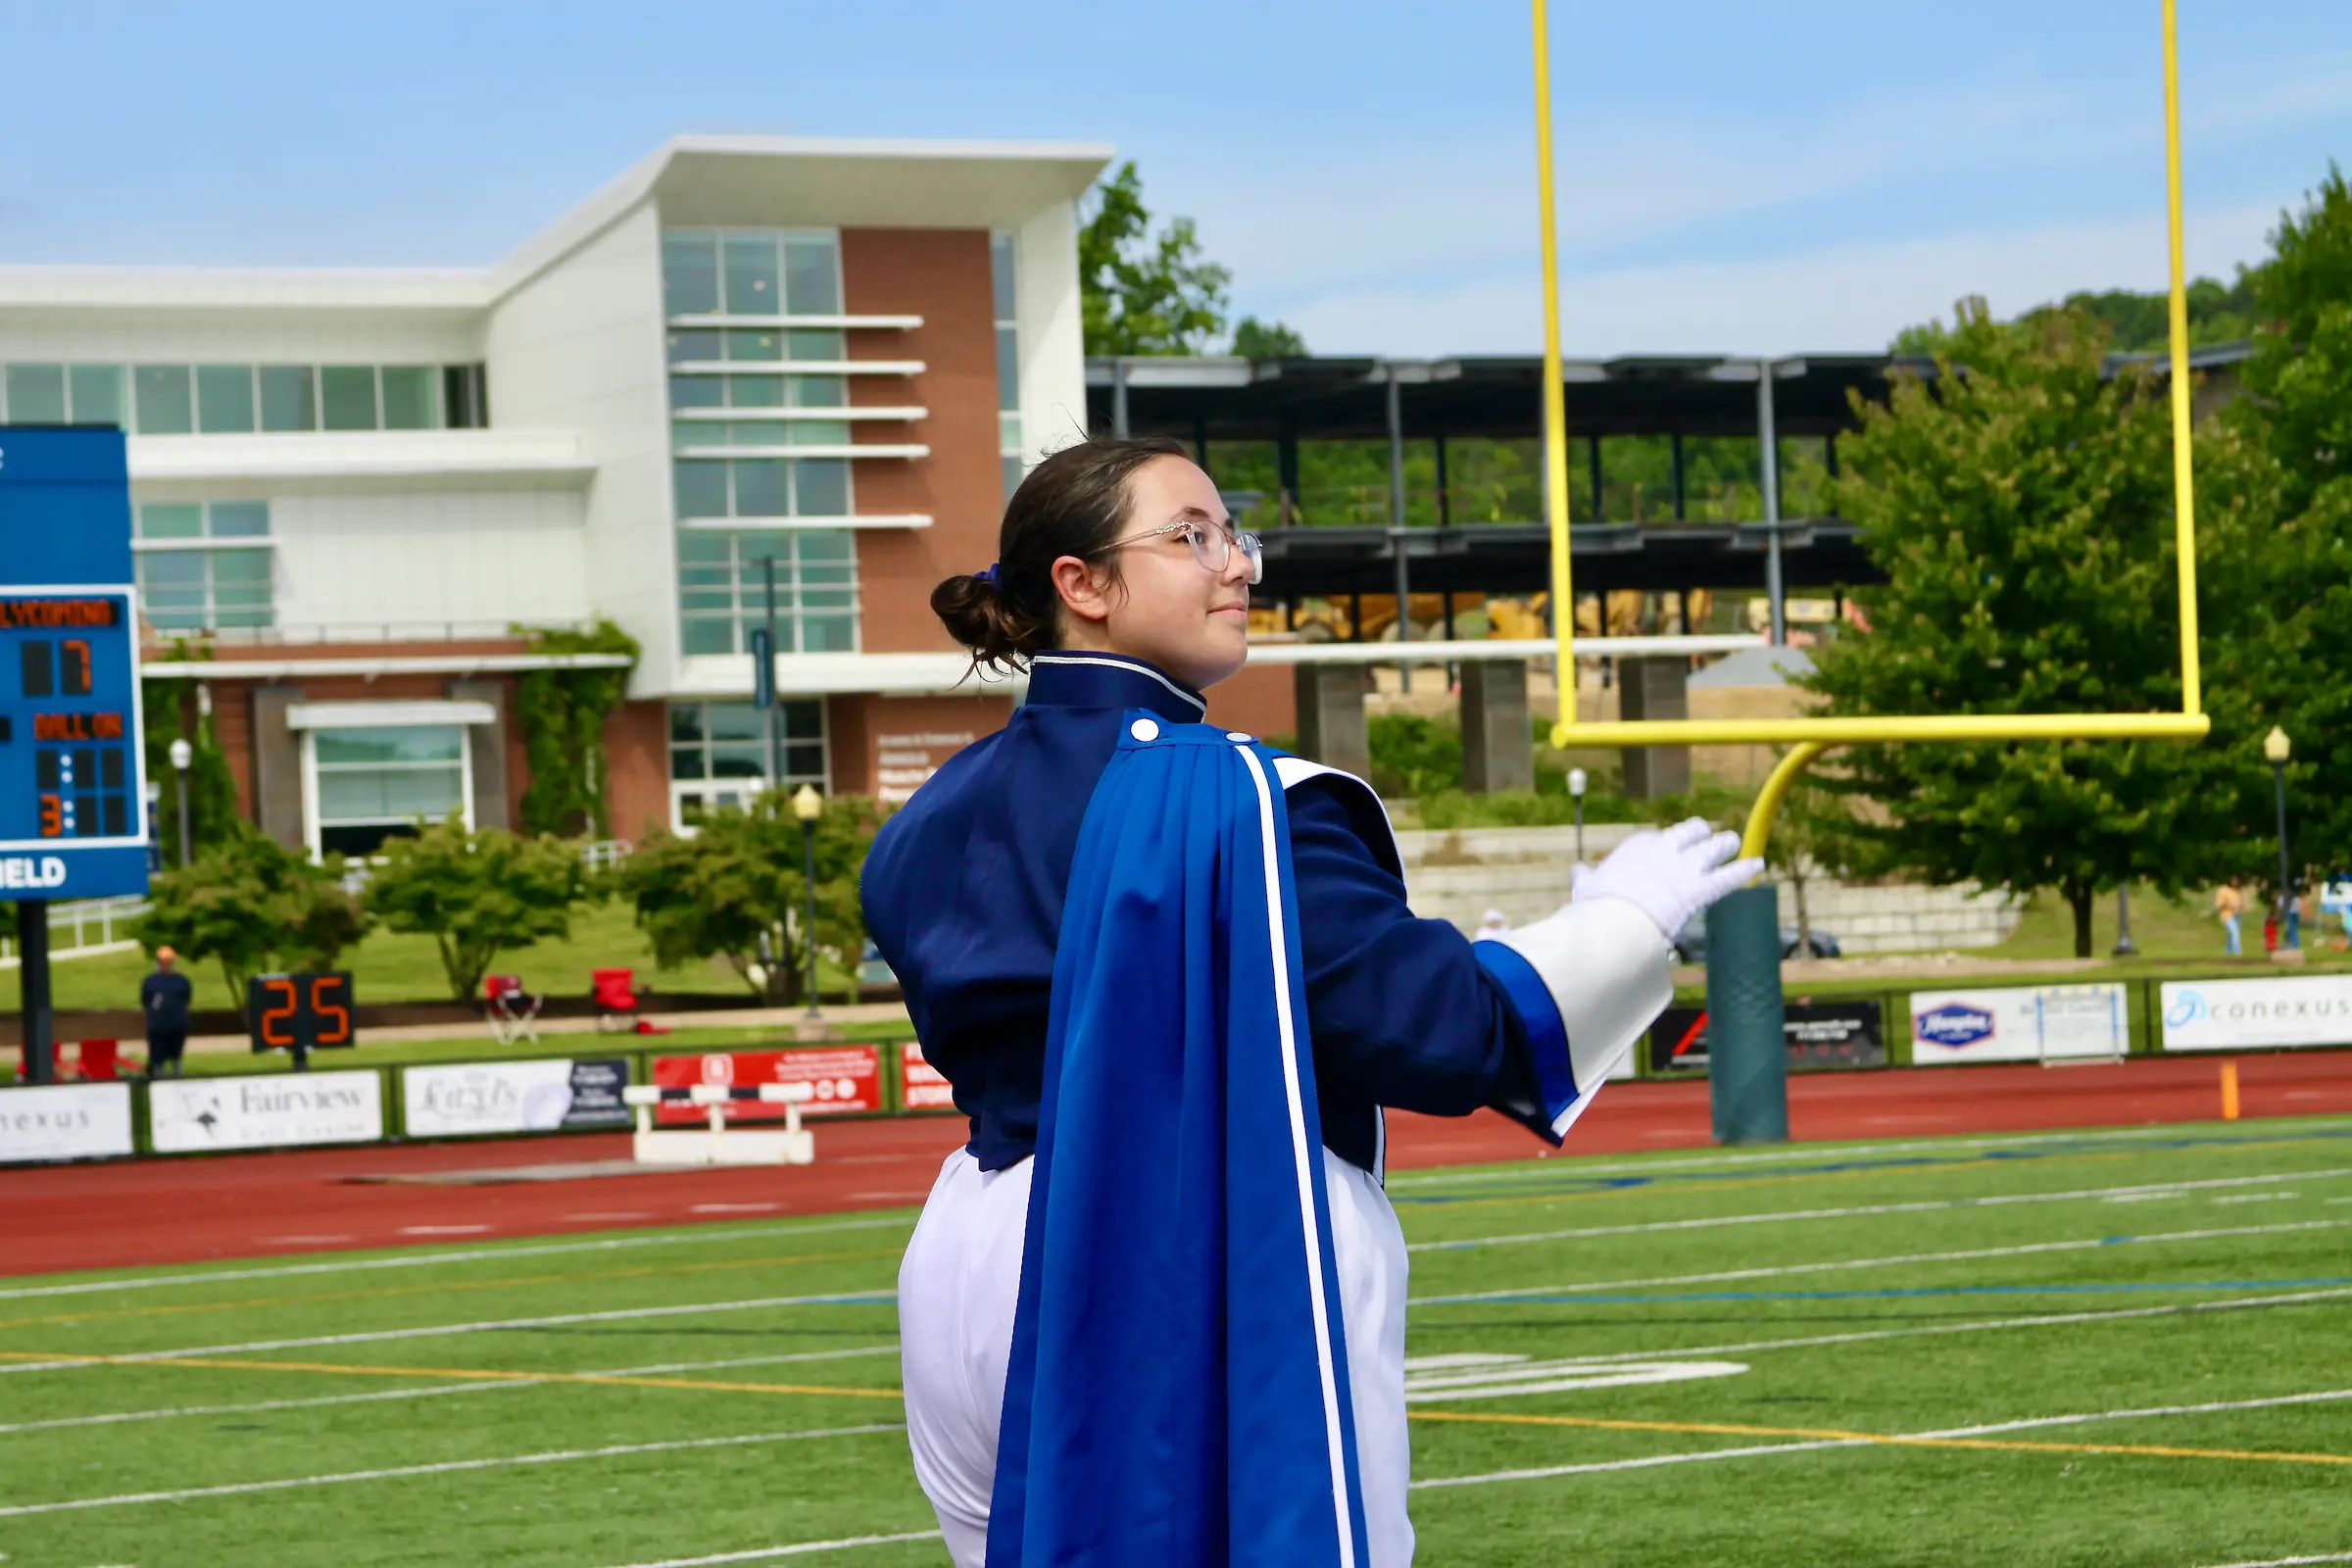 Marching band conductor stands on football field